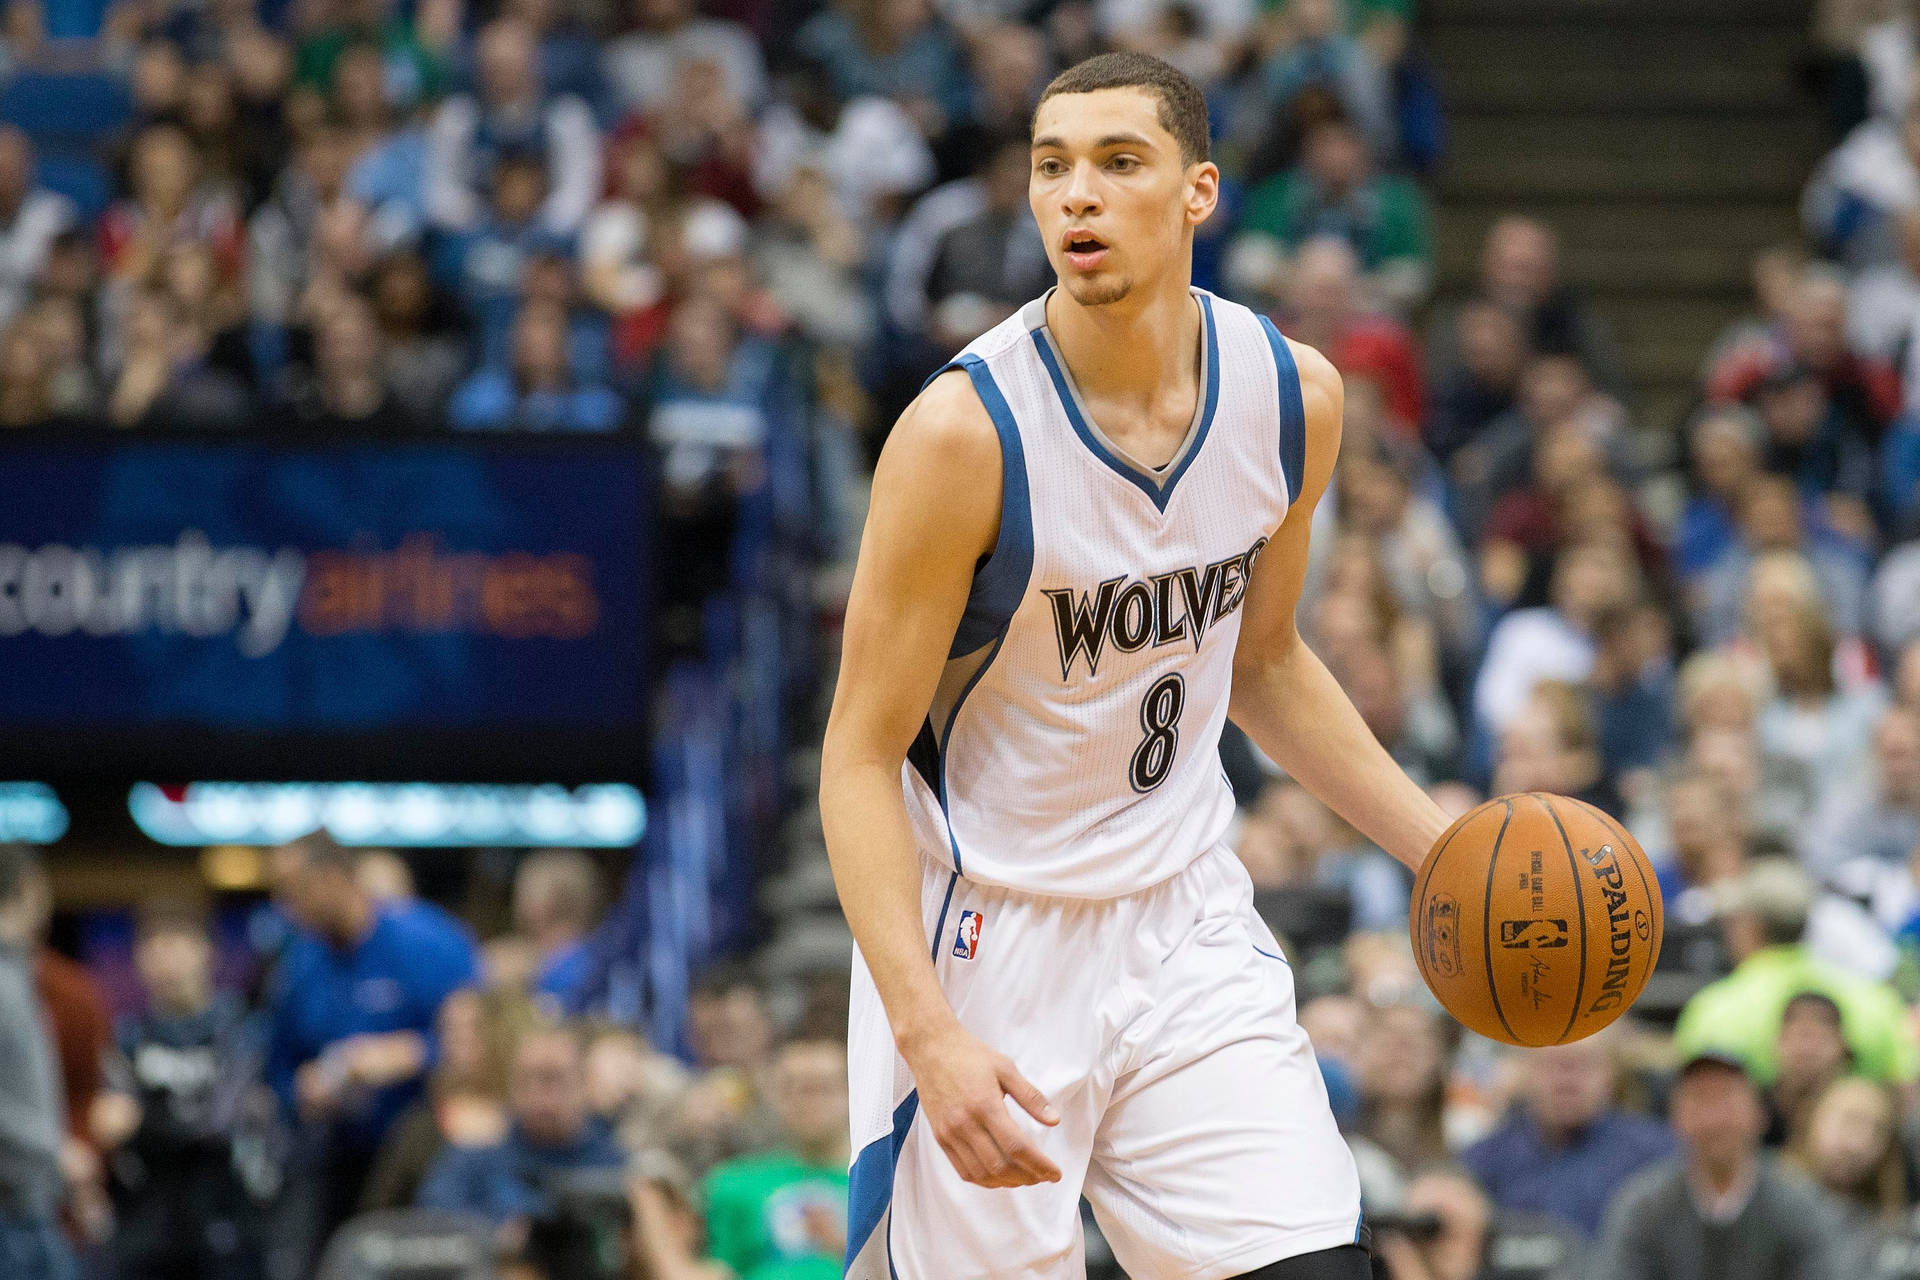 Young Wolves Player Zach Lavine Background